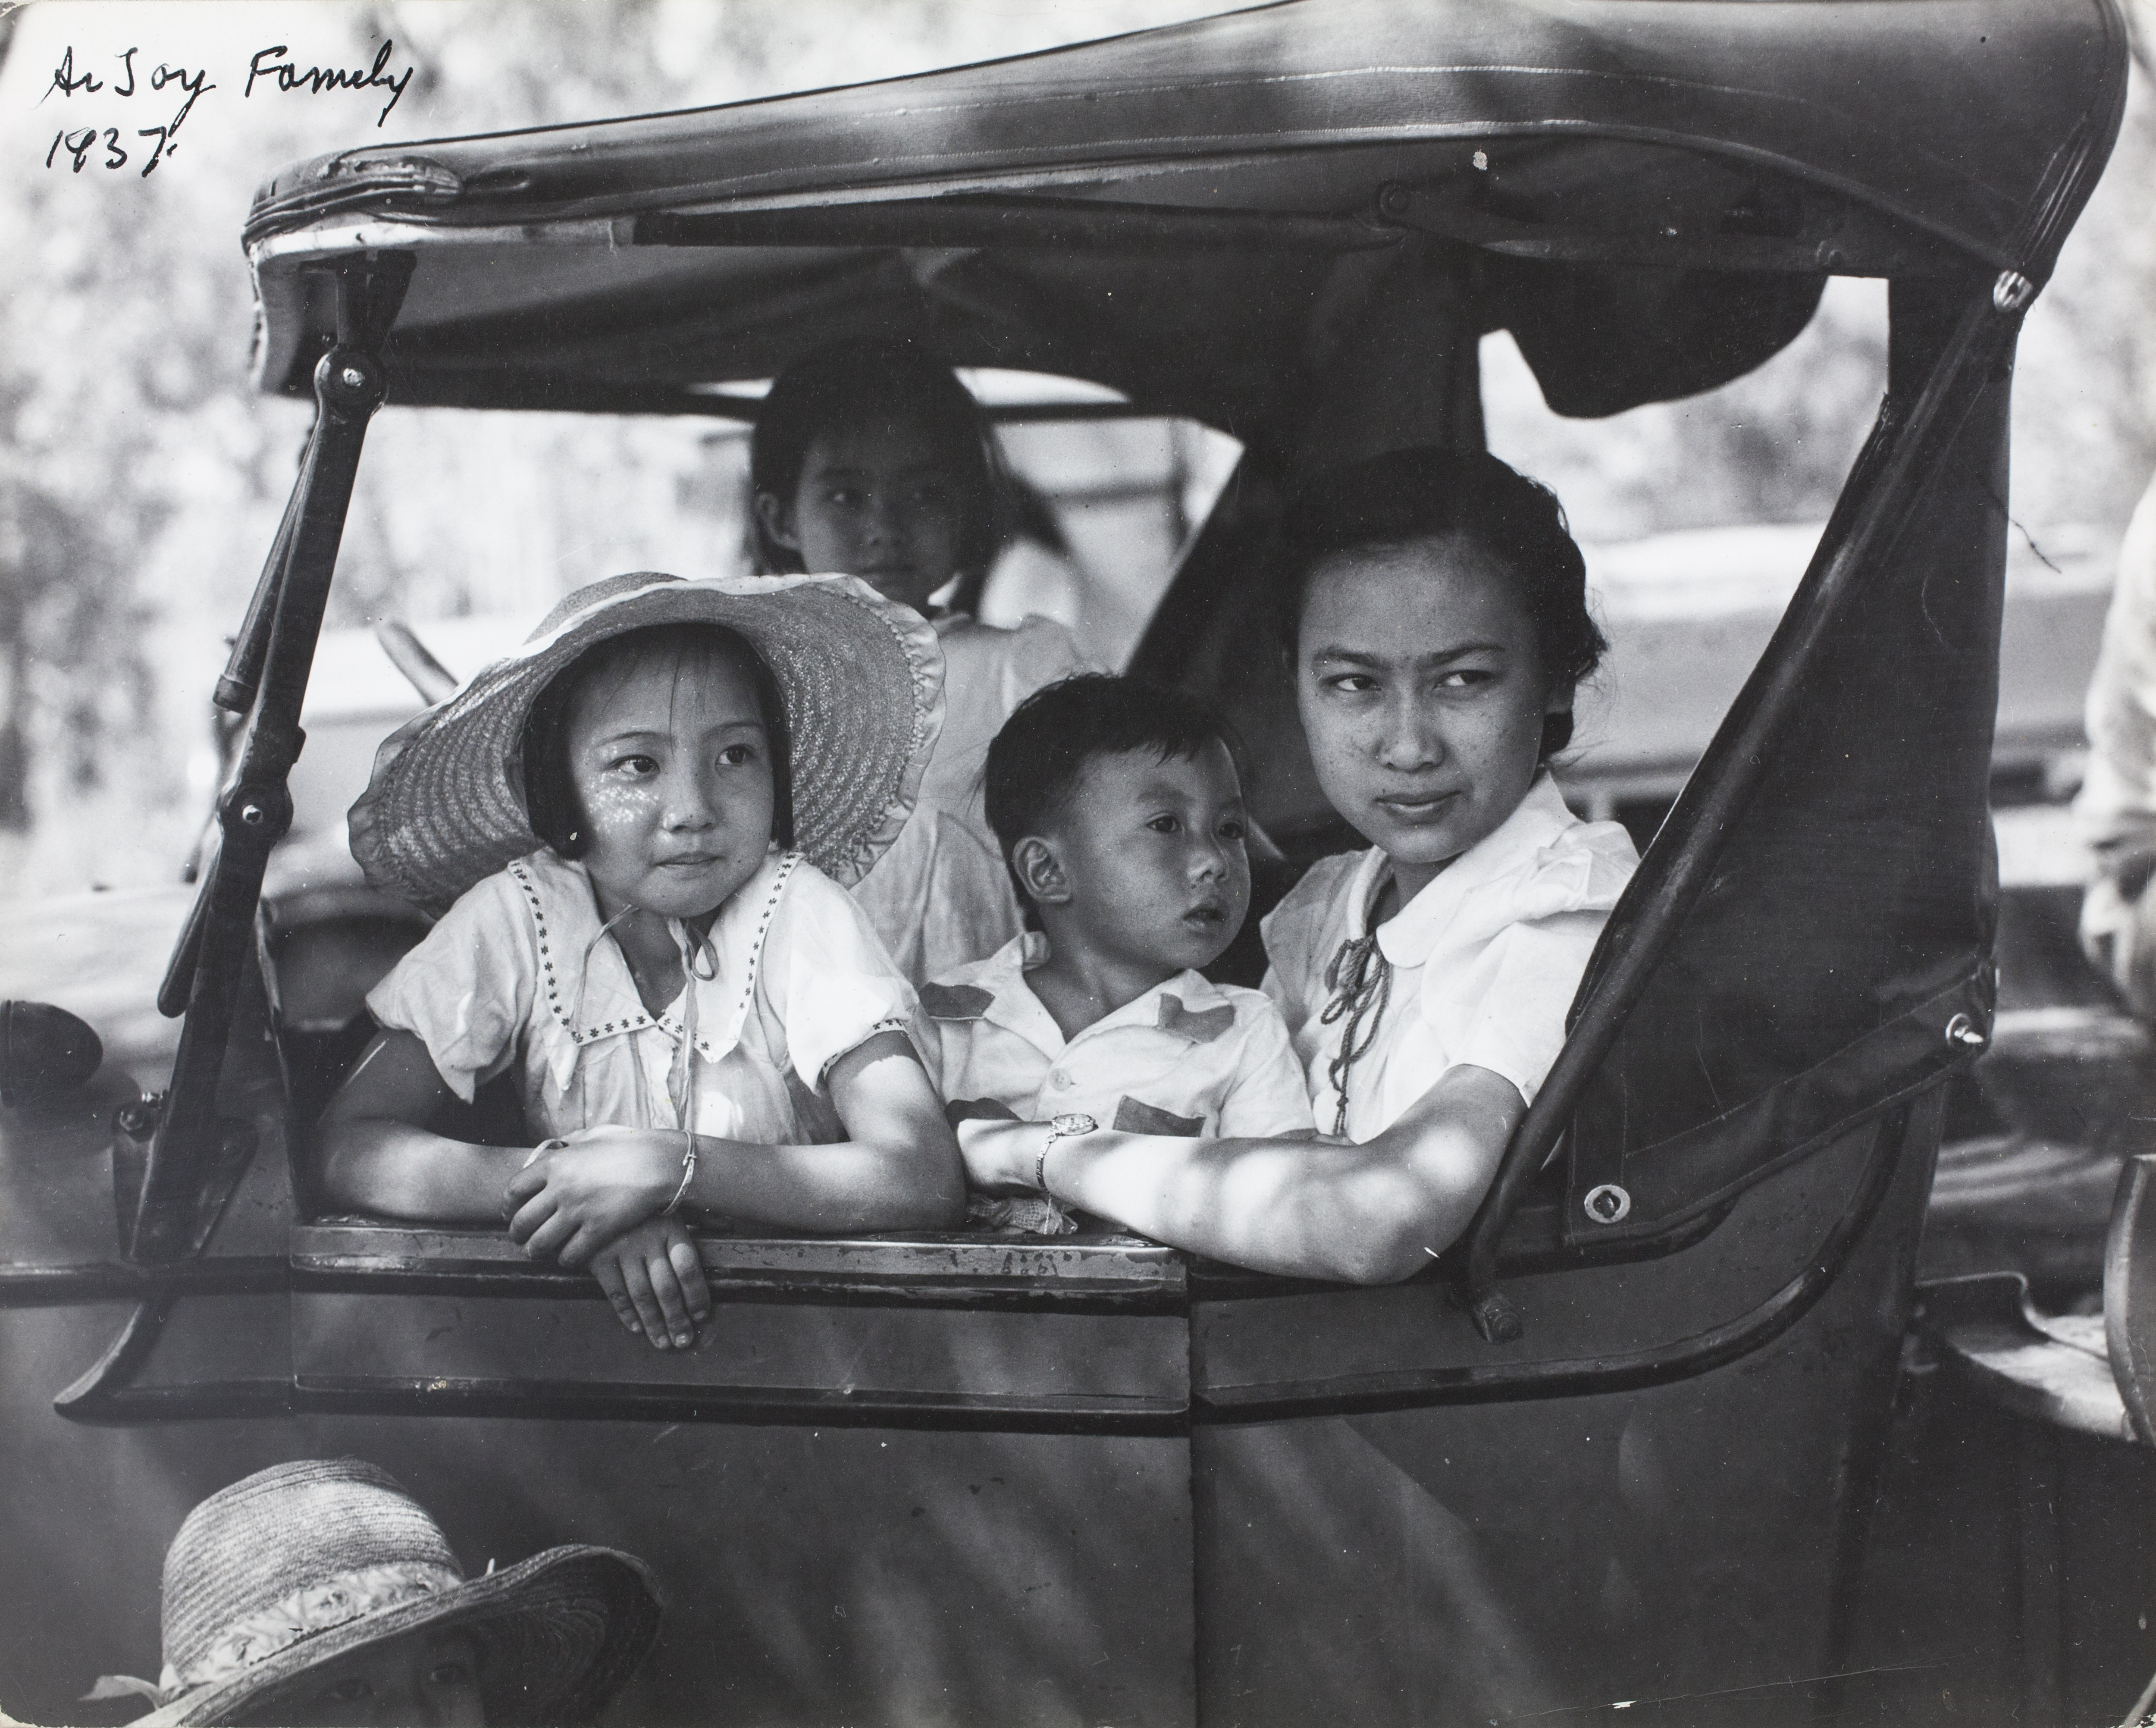 Group of children sitting in a car, looking out